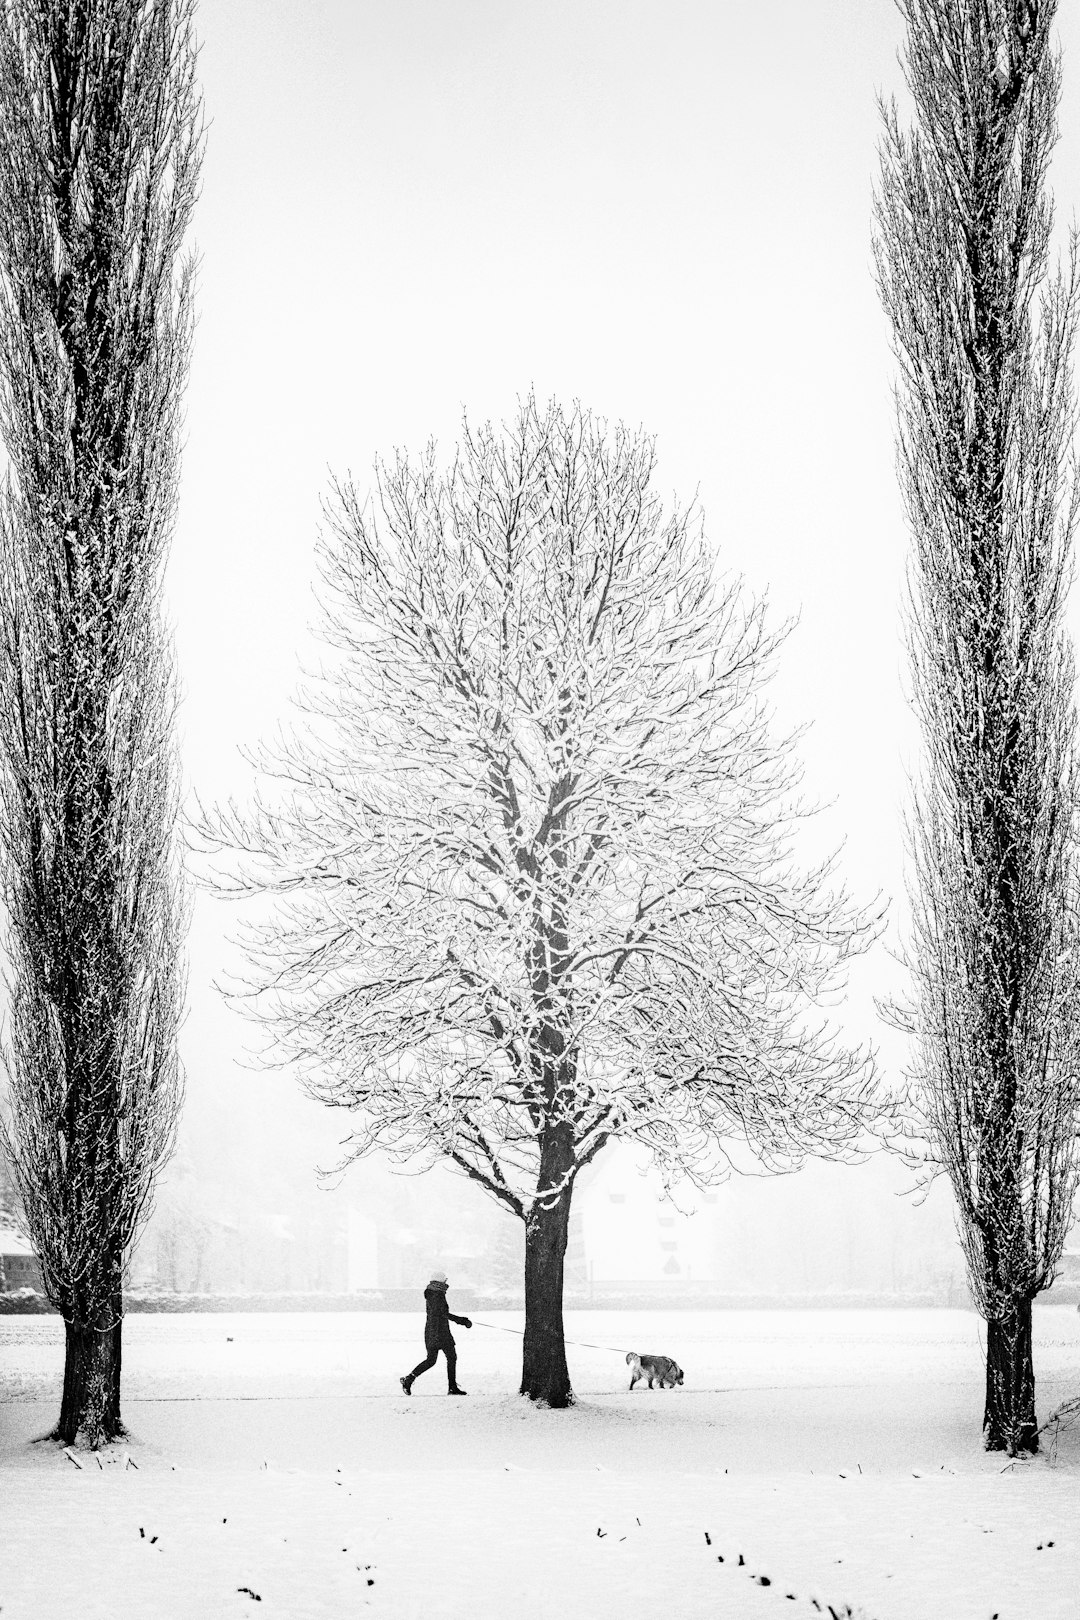 bare trees on snow covered ground during daytime